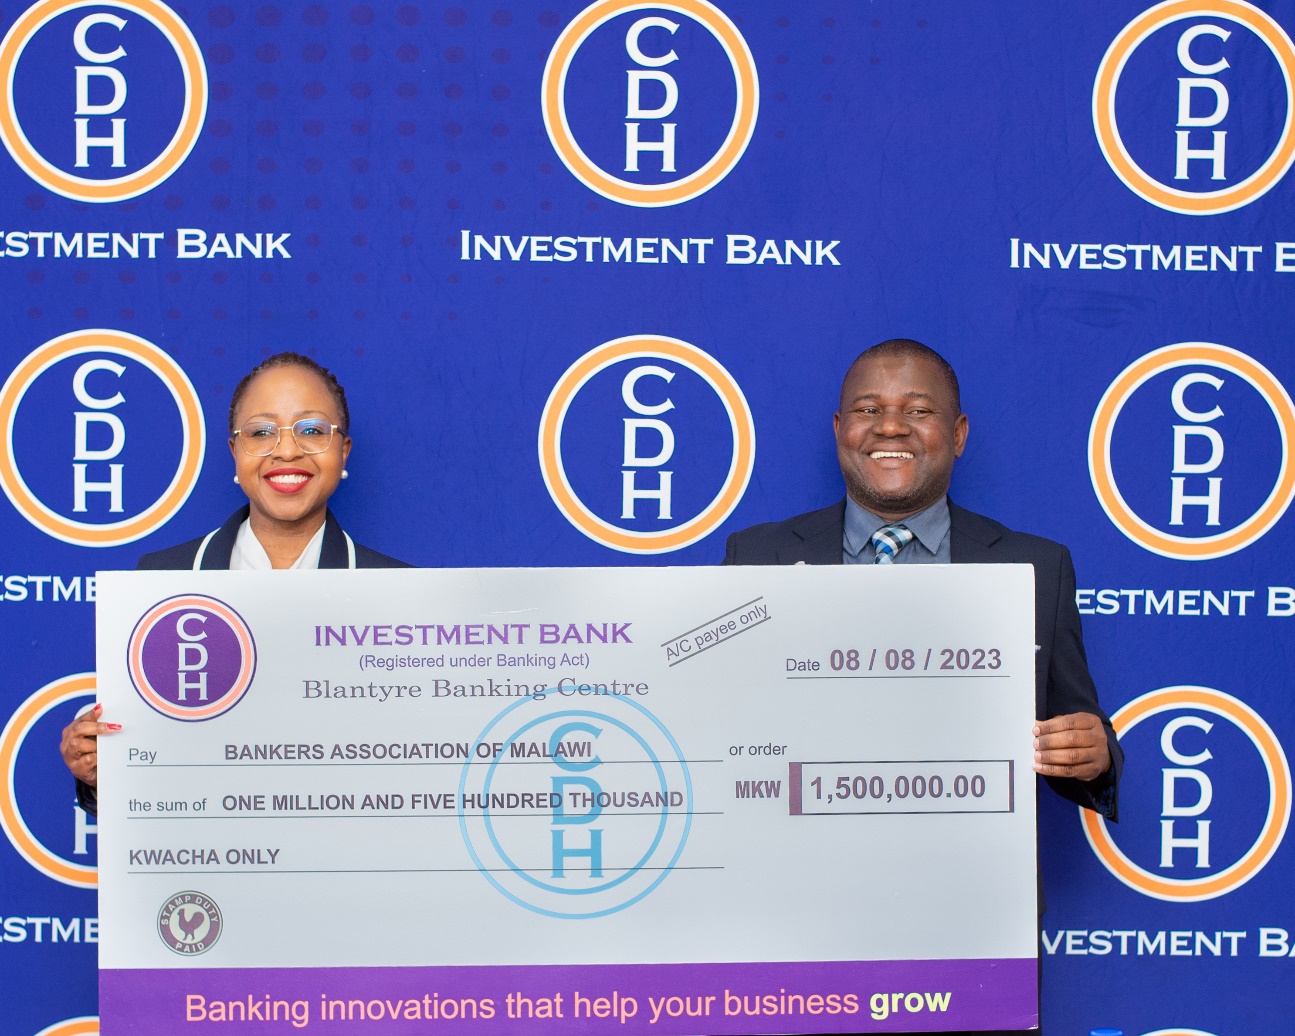 Beatrix Mosiwa, Executive Director – Finance and Operations, CDH Investment Bank hands over funds to Chifundo Mmaniwa, Chief Operations Officer, Bankers Association of Malawi 